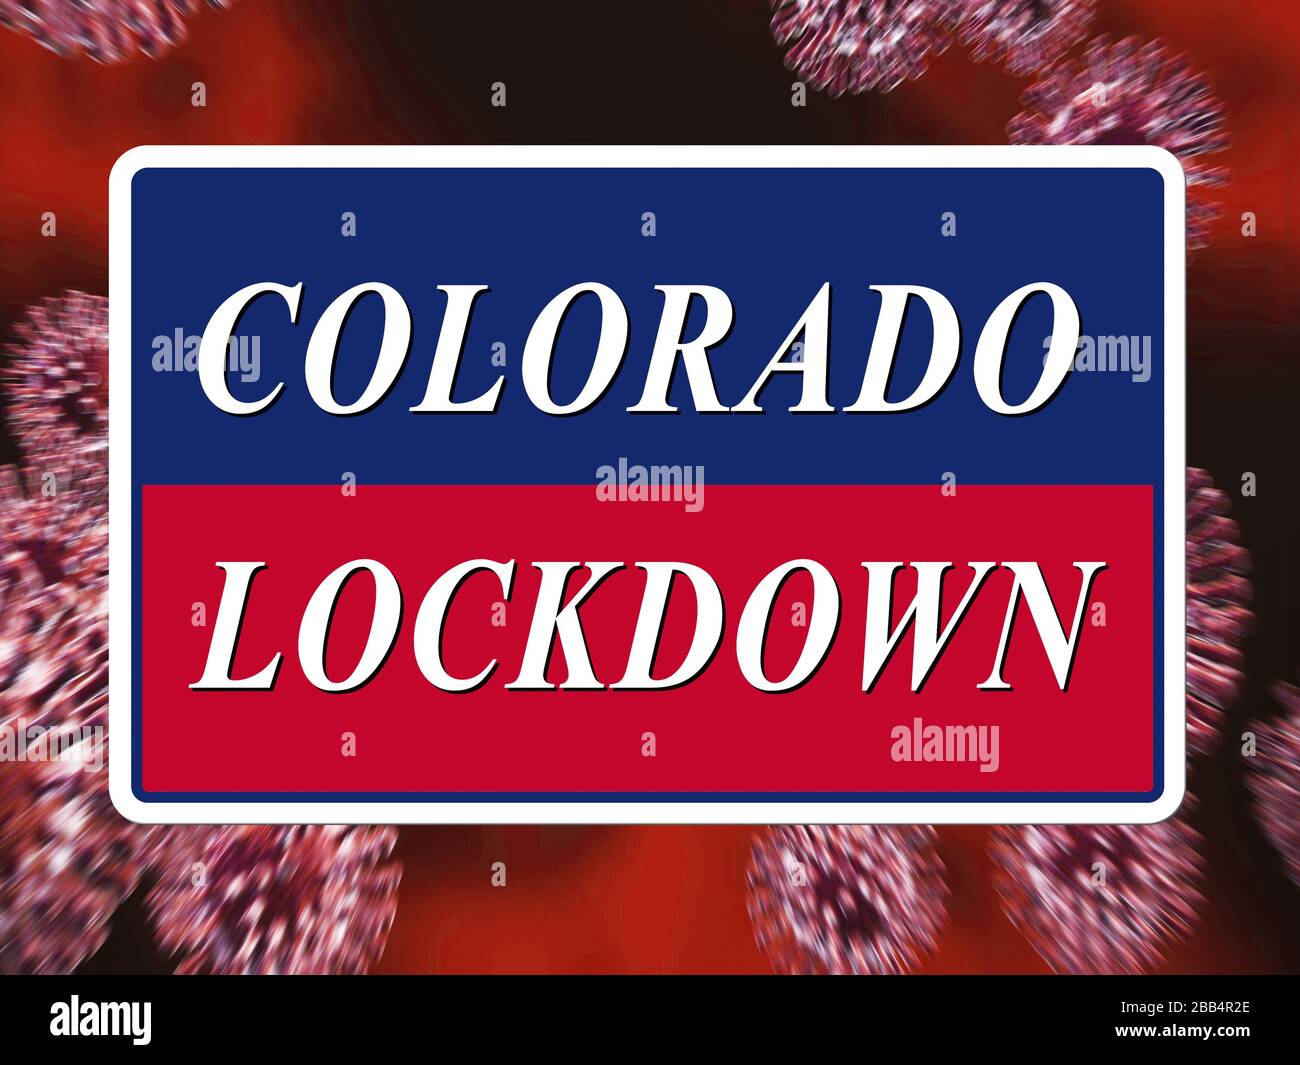 Colorado lockdown means curfew from coronavirus covid19. CO solitary seclusion from covid-19 with stop home restriction - 3d Illustration Stock Photo